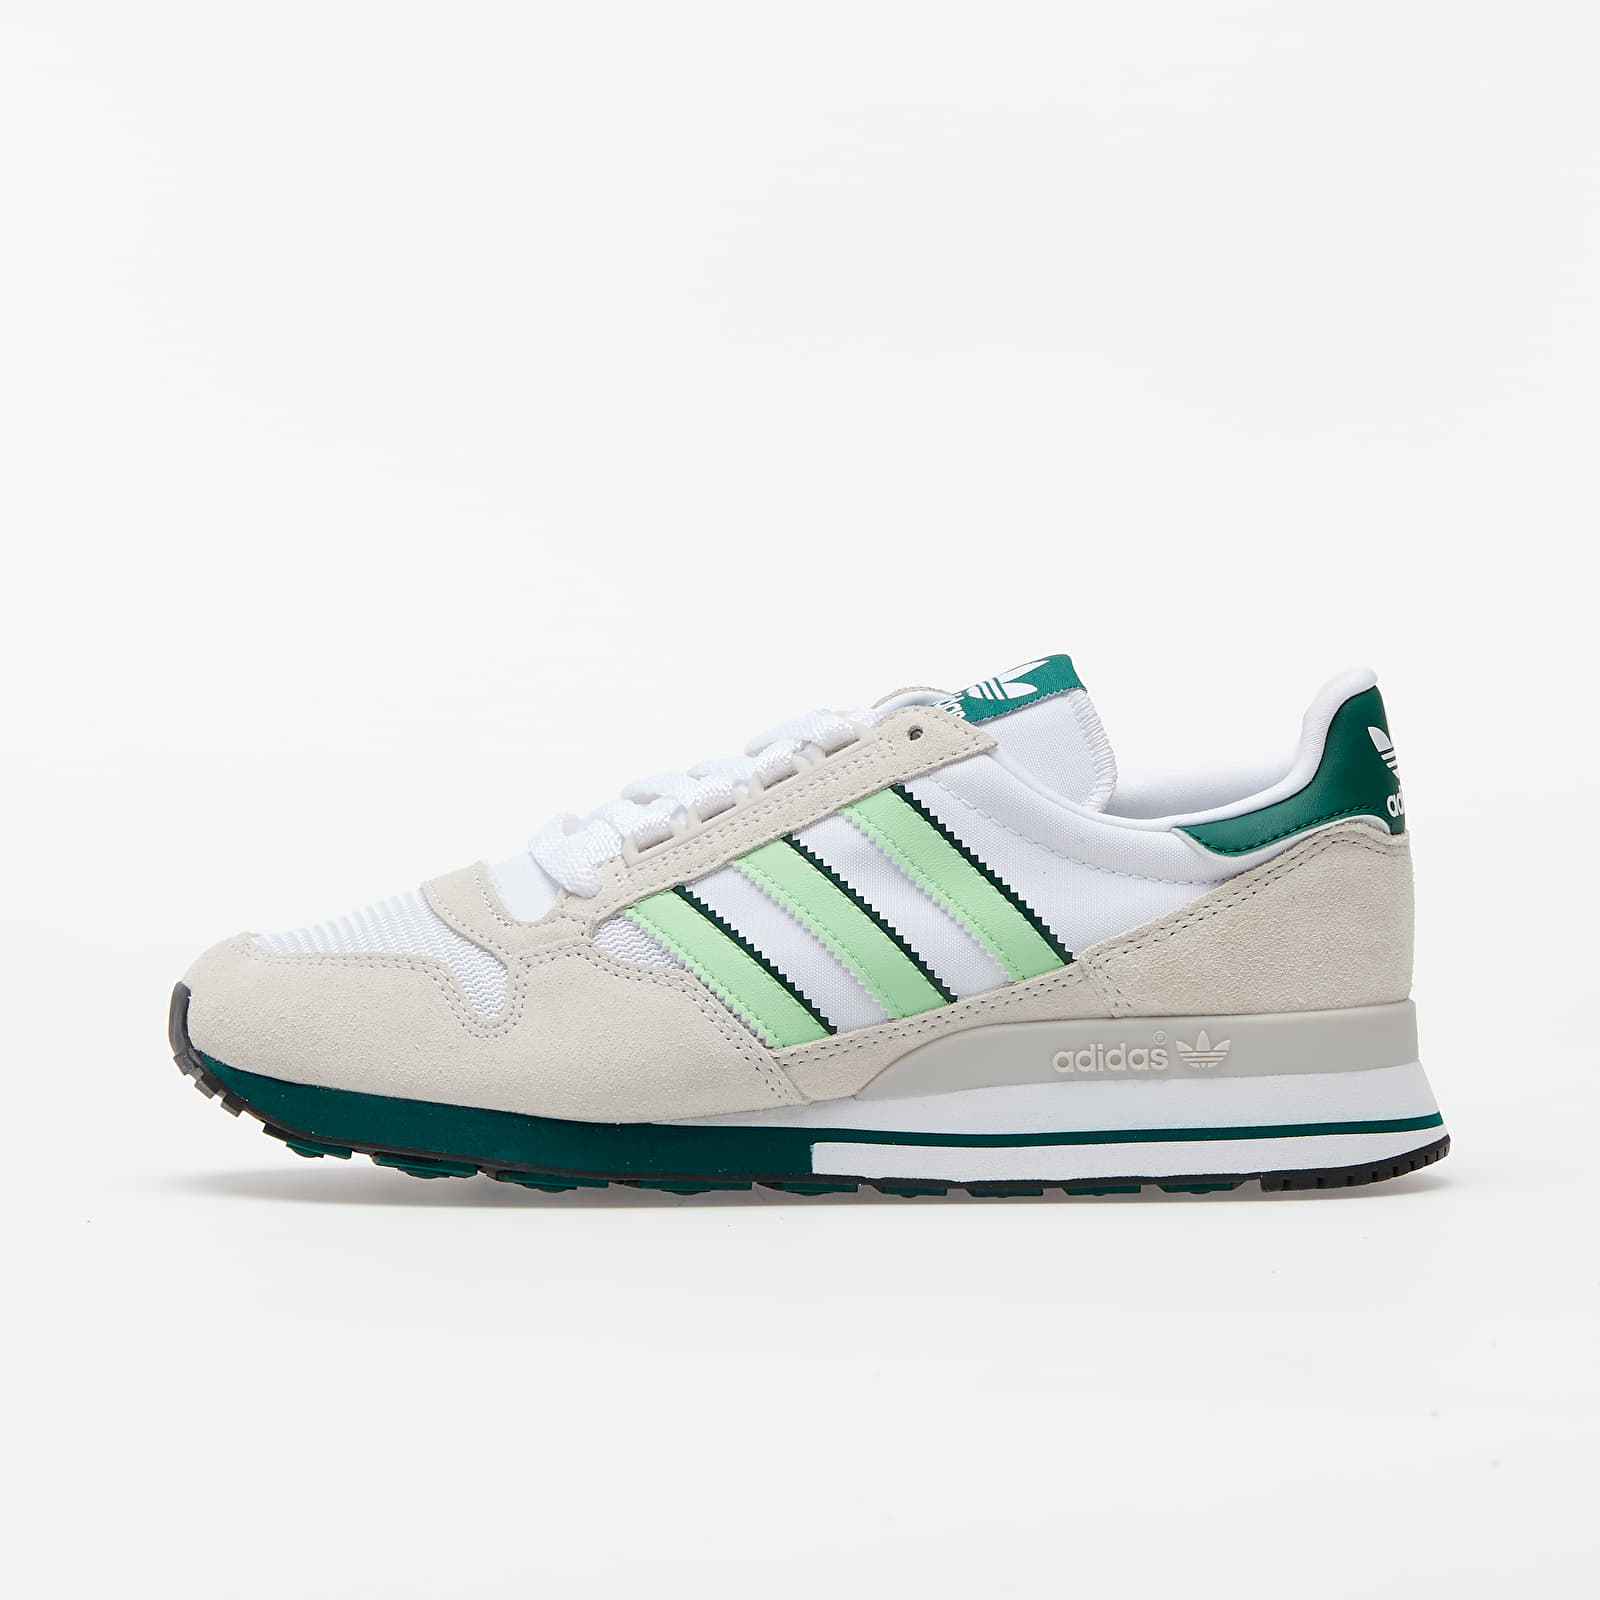 Chaussures et baskets femme adidas ZX 500 W Crystal White/ Glow Mint/ Ftw White